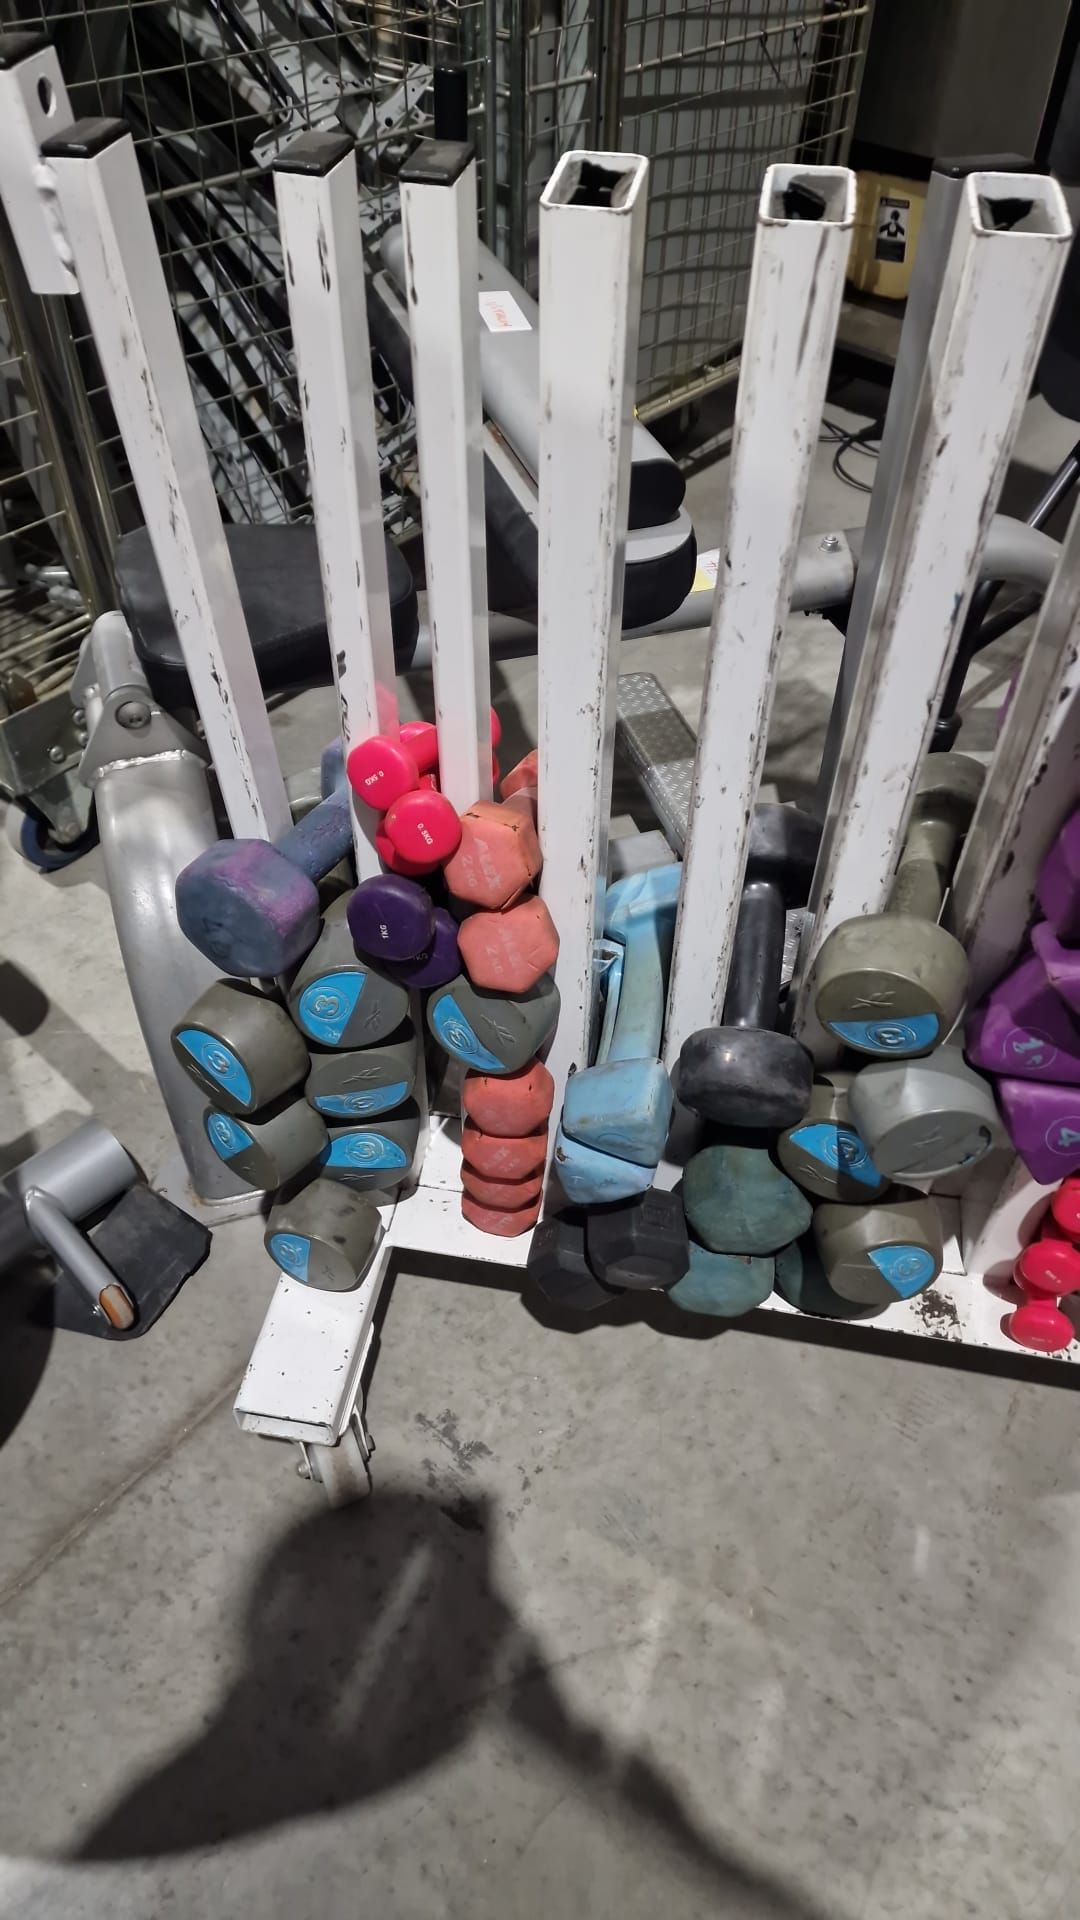 Studio Dumbell Rack With Assorted Dumbells - Image 3 of 4